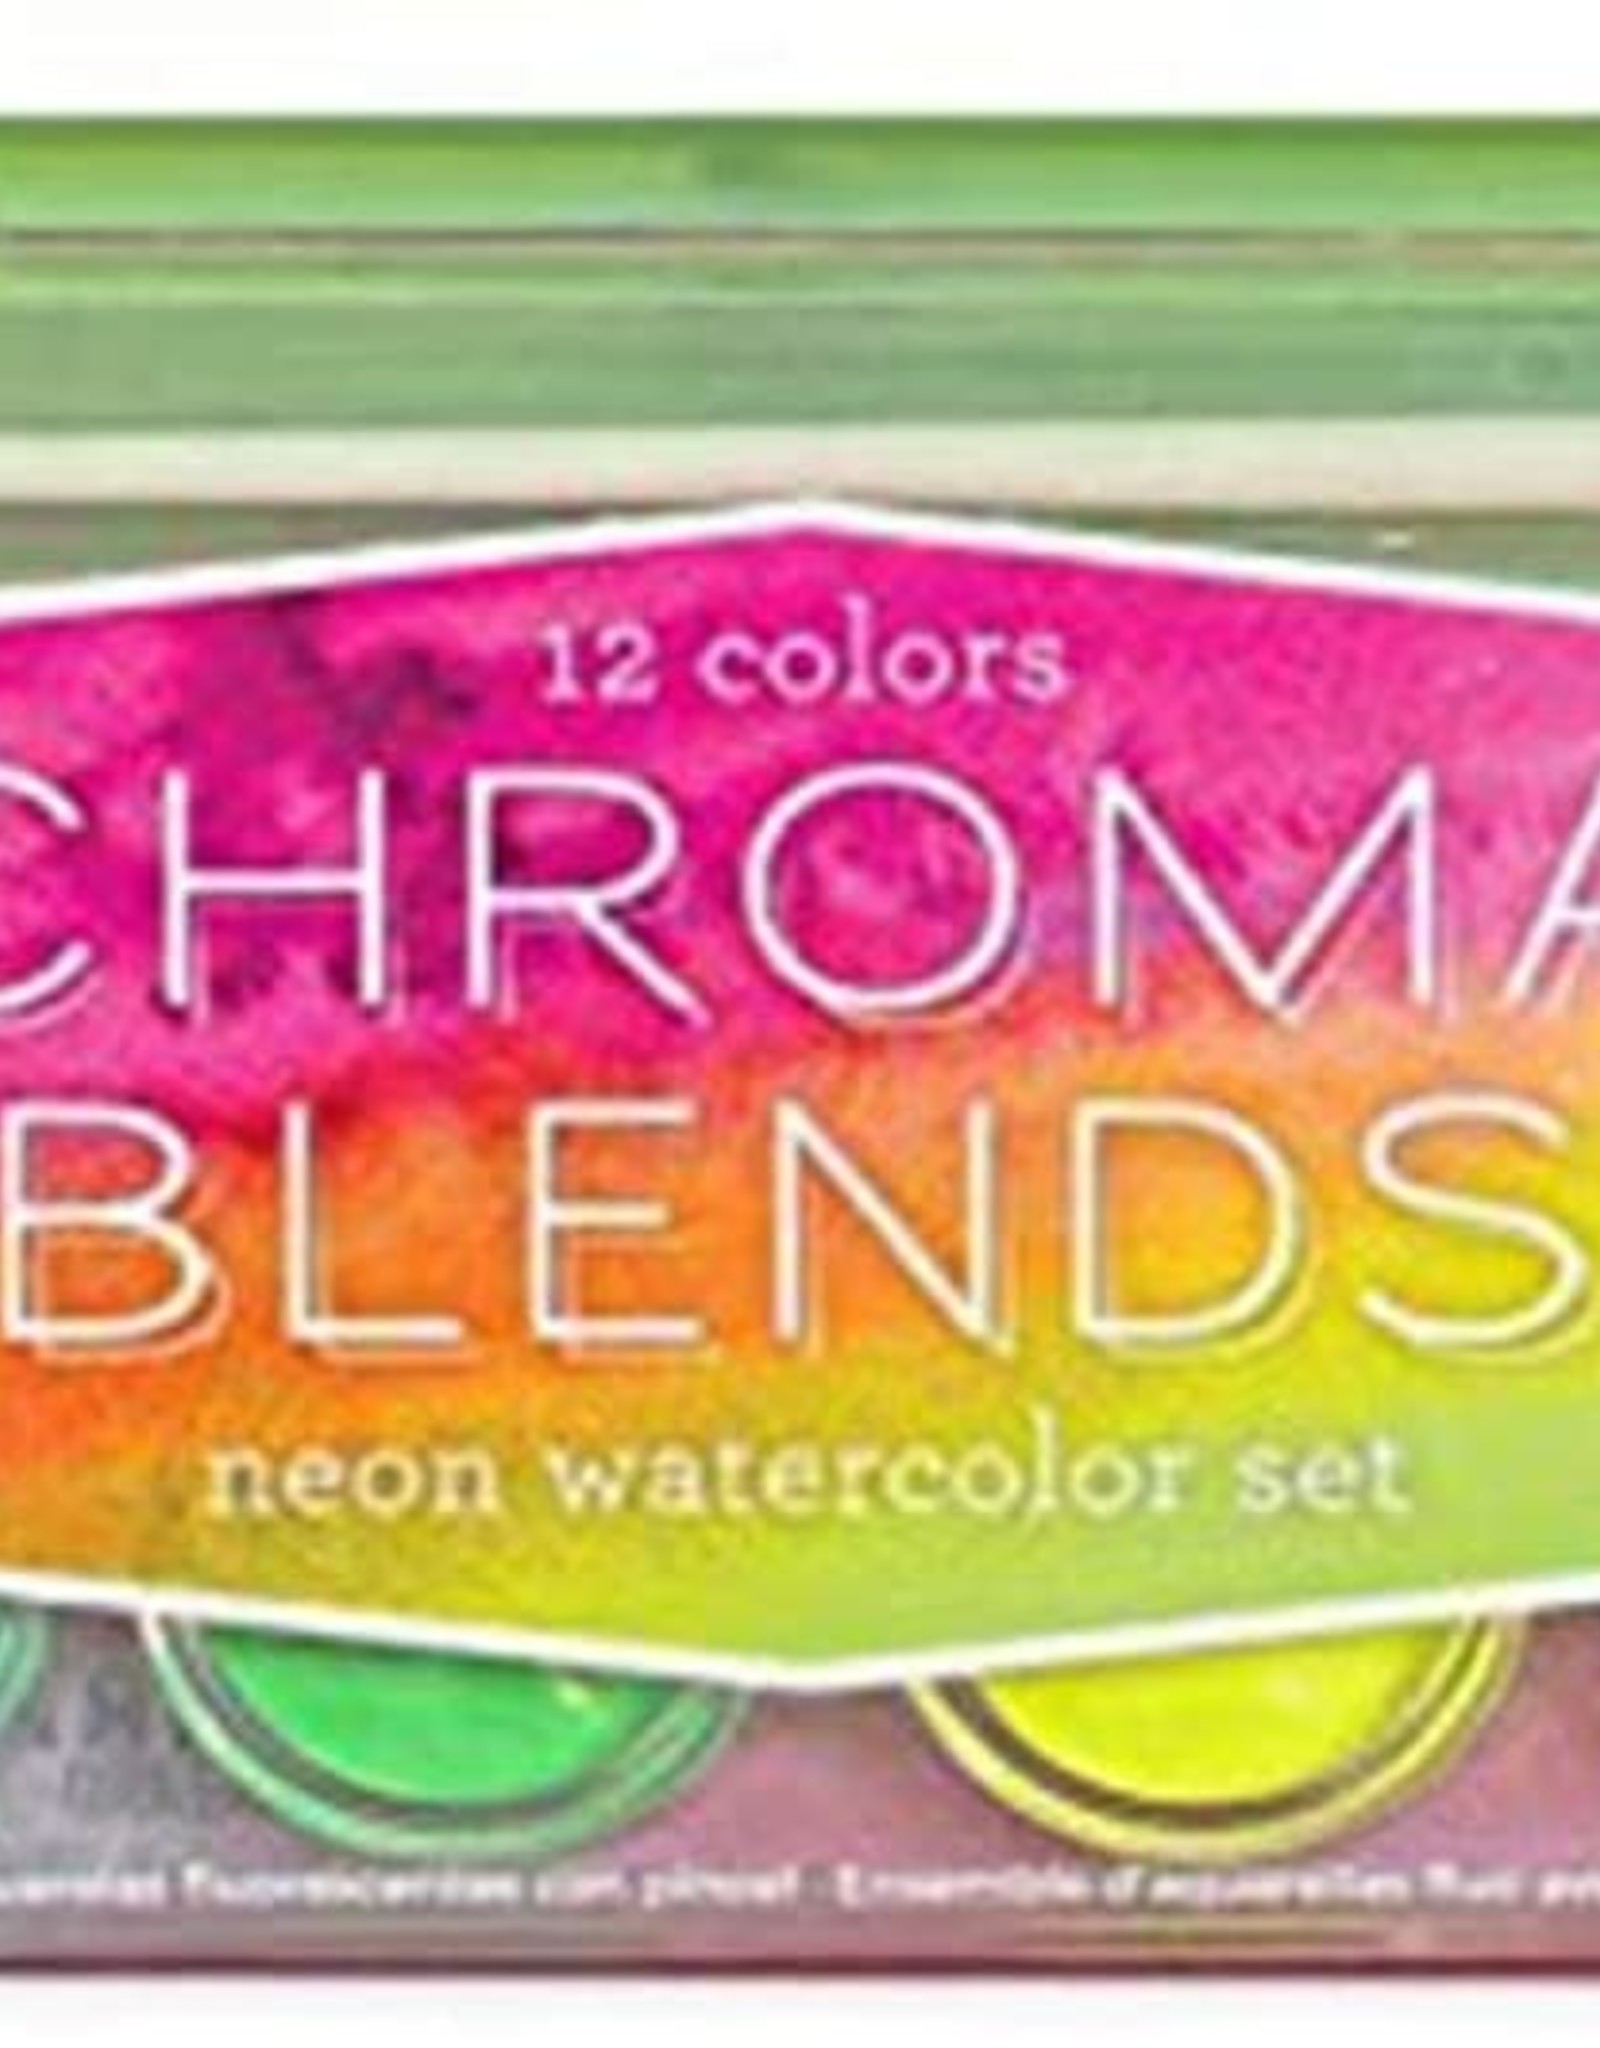 Chroma Blends Circular Watercolor Paper - Toy Market